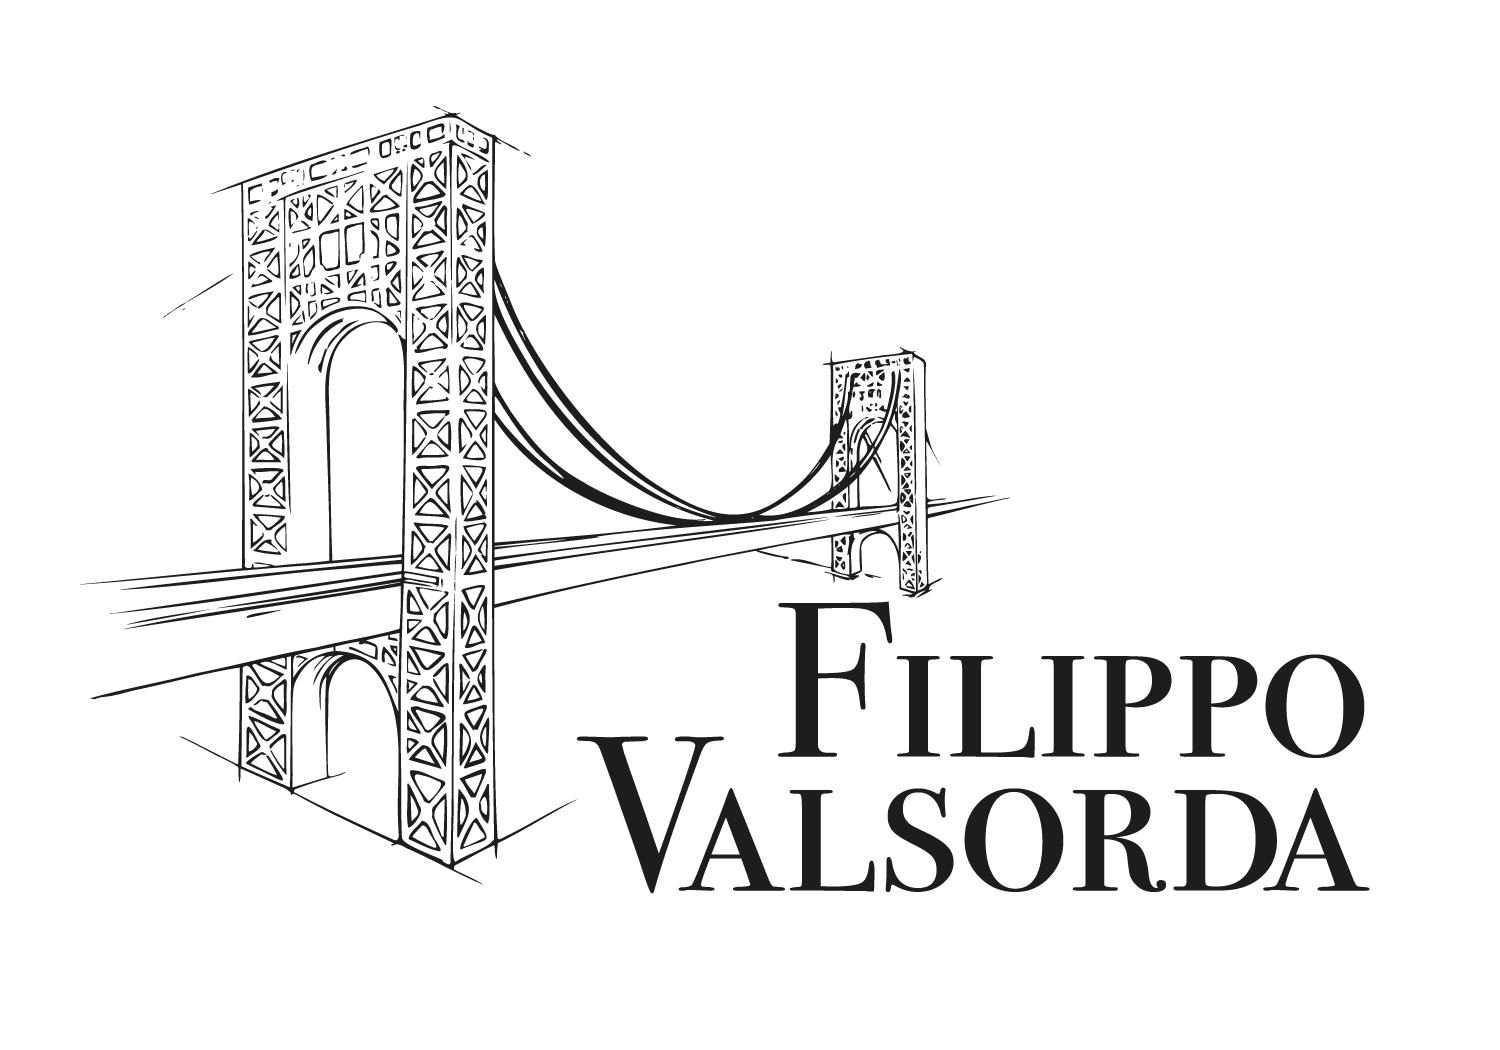 The George Washington bridge in NYC, drawn stylized in black ink, with the name Filippo Valsorda